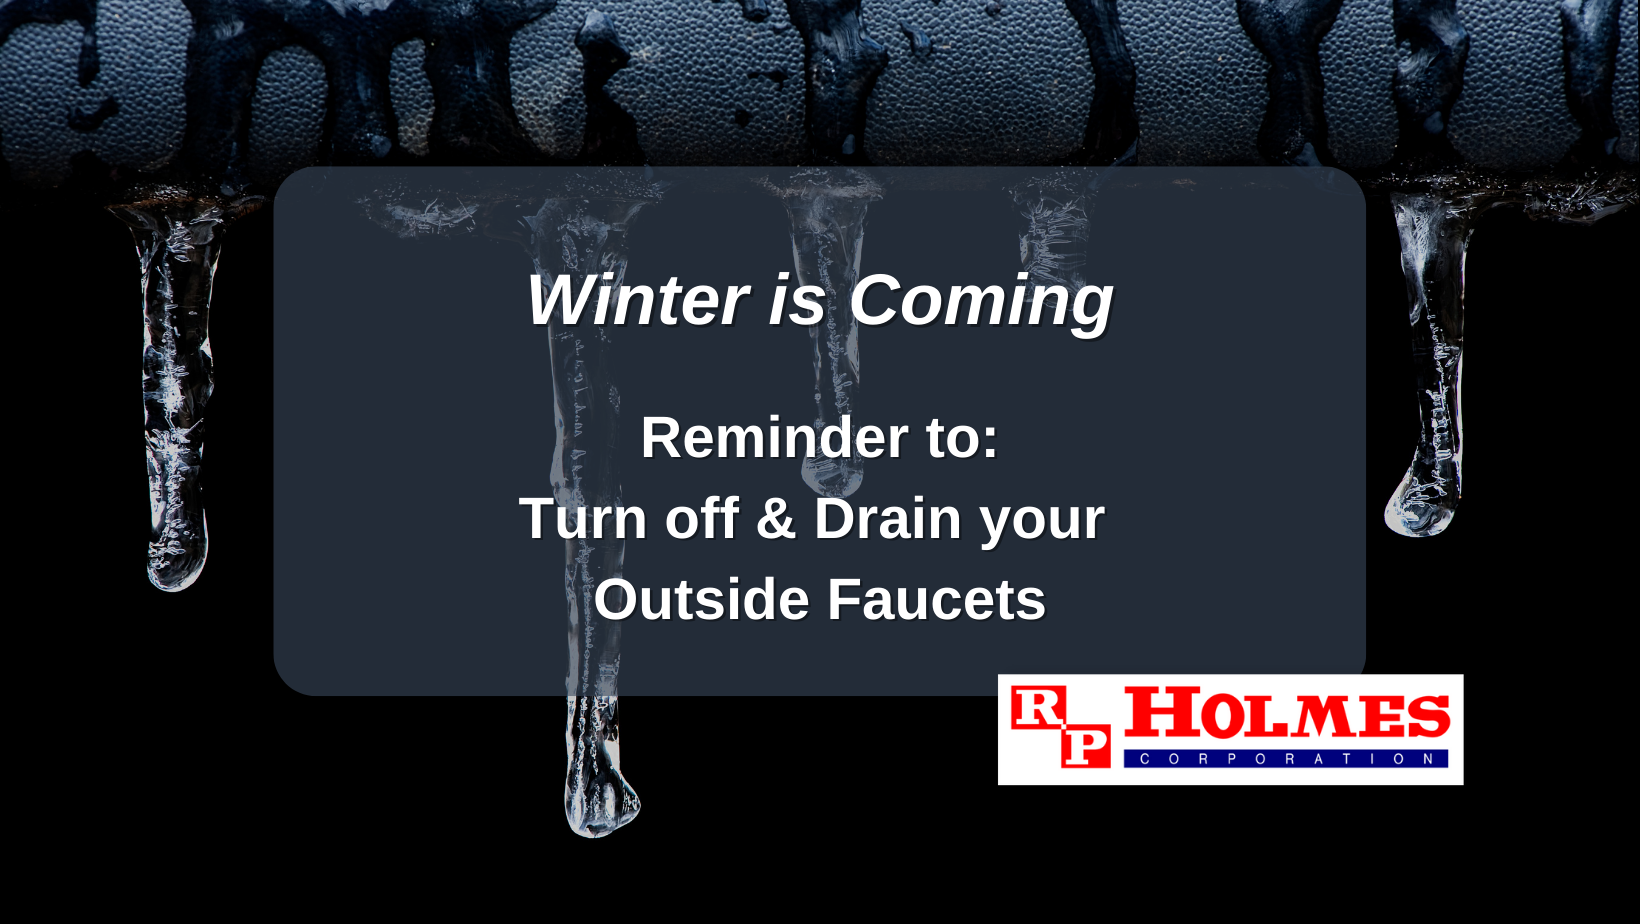 turn off and drain their outside faucets.